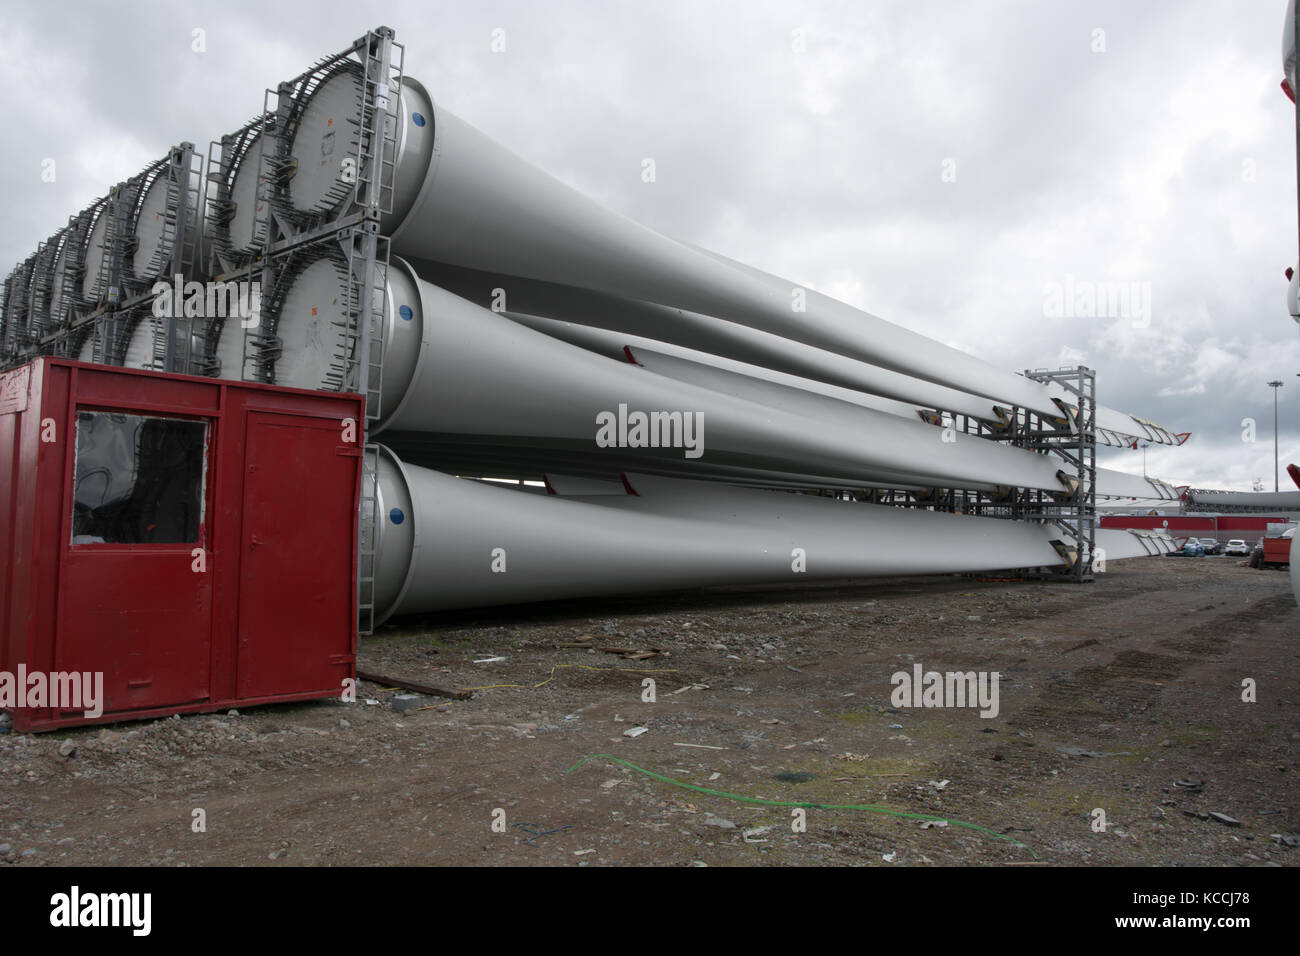 Red Cabin and Wind Turbine Blades Stock Photo